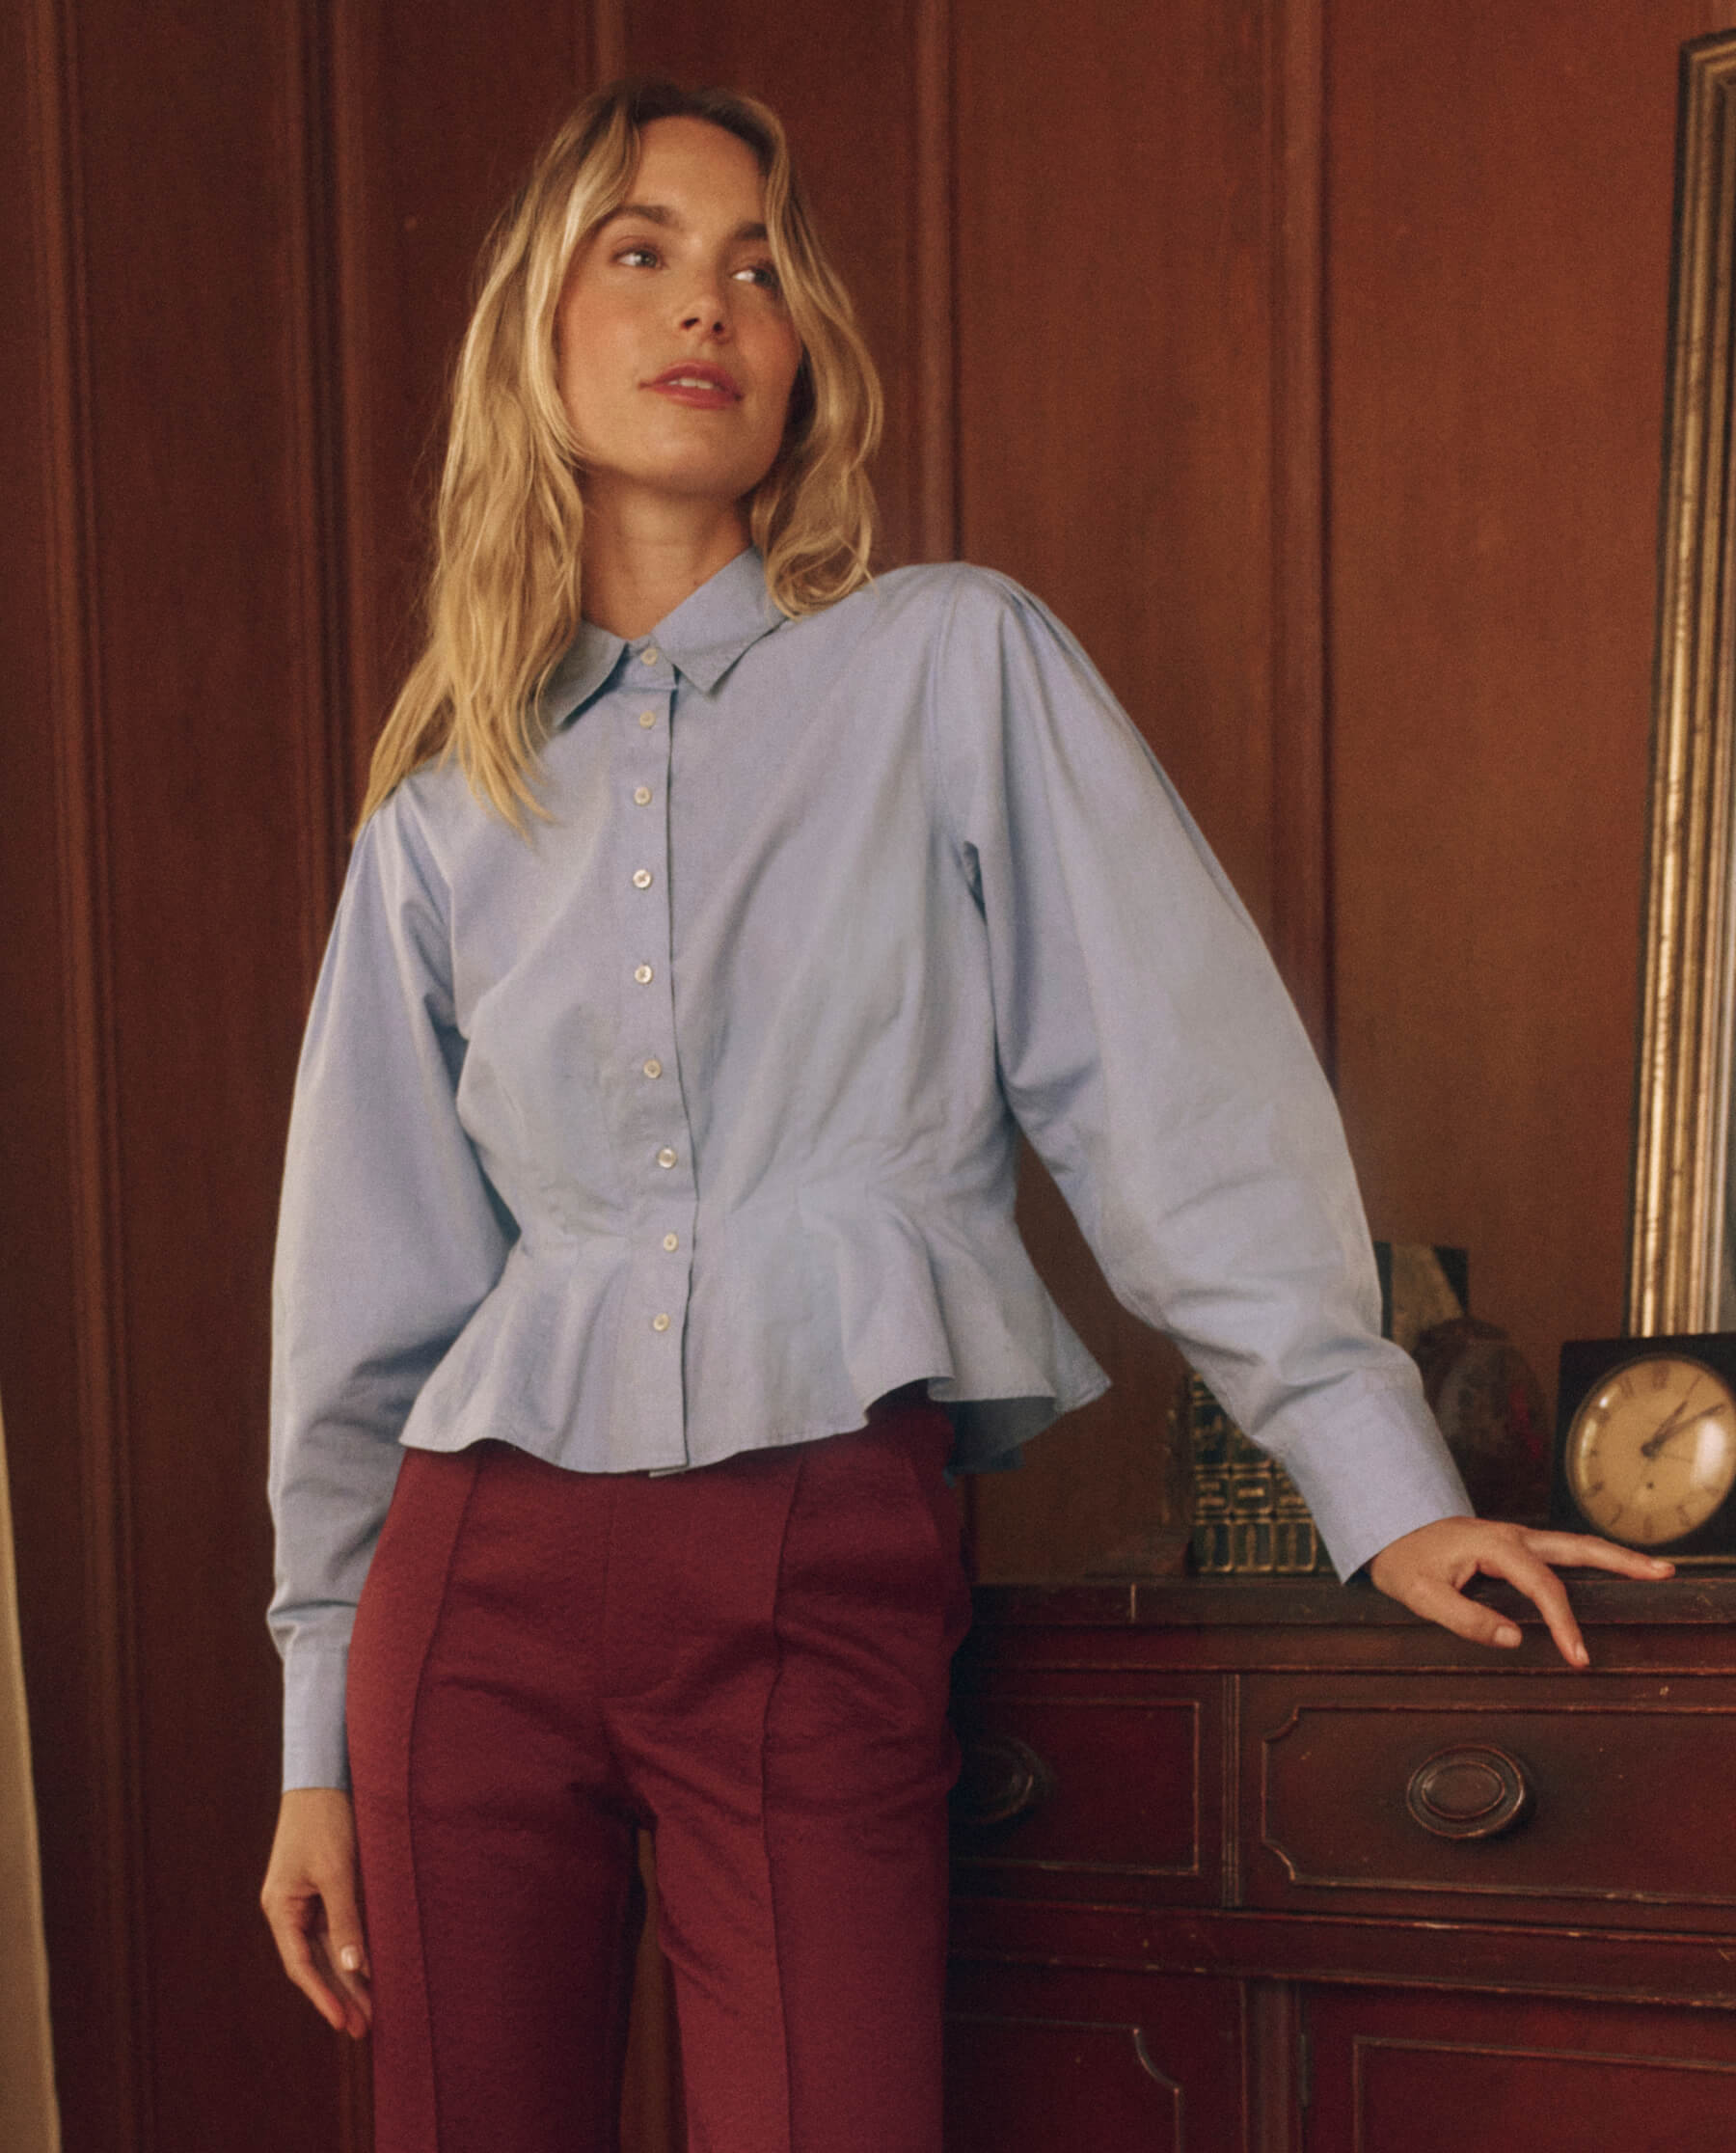 The Honor Top. -- Blue Oxford SHIRTS THE GREAT. HOL 23 D1 SALE